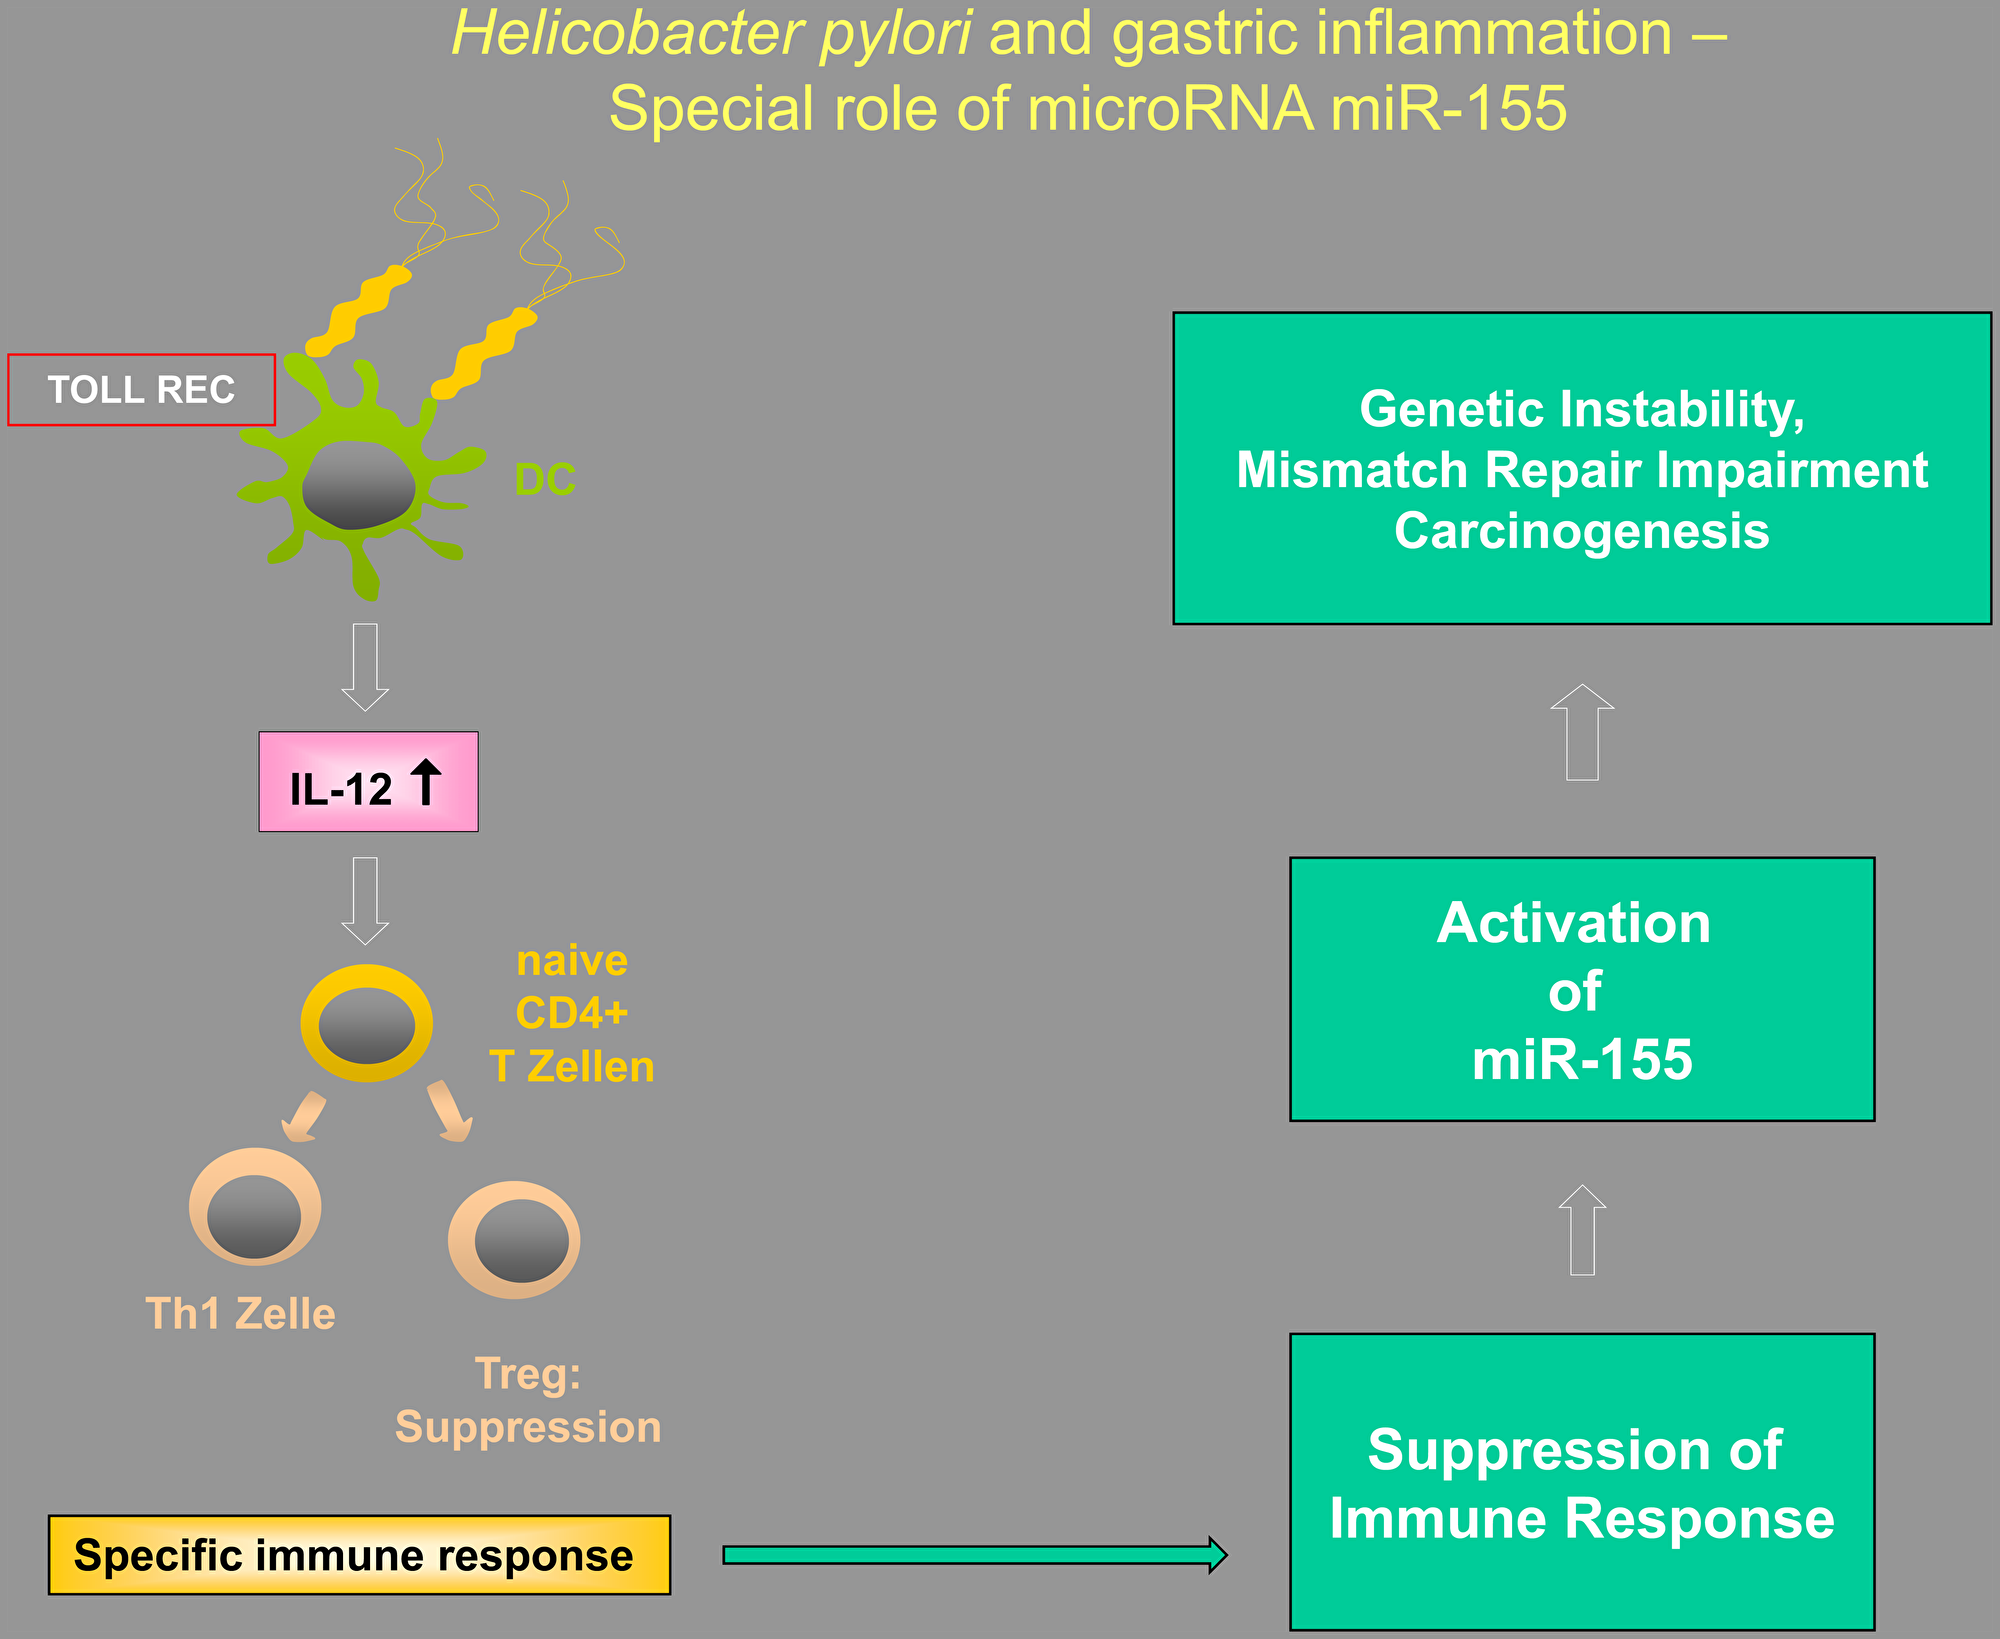 Figure 1: Illustration of the putative interactions between Tregs, Toll-like receptors (TLRs), and microRNAs in  Helicobacter-induced inflammation, highlighting the special importance of miR-155.